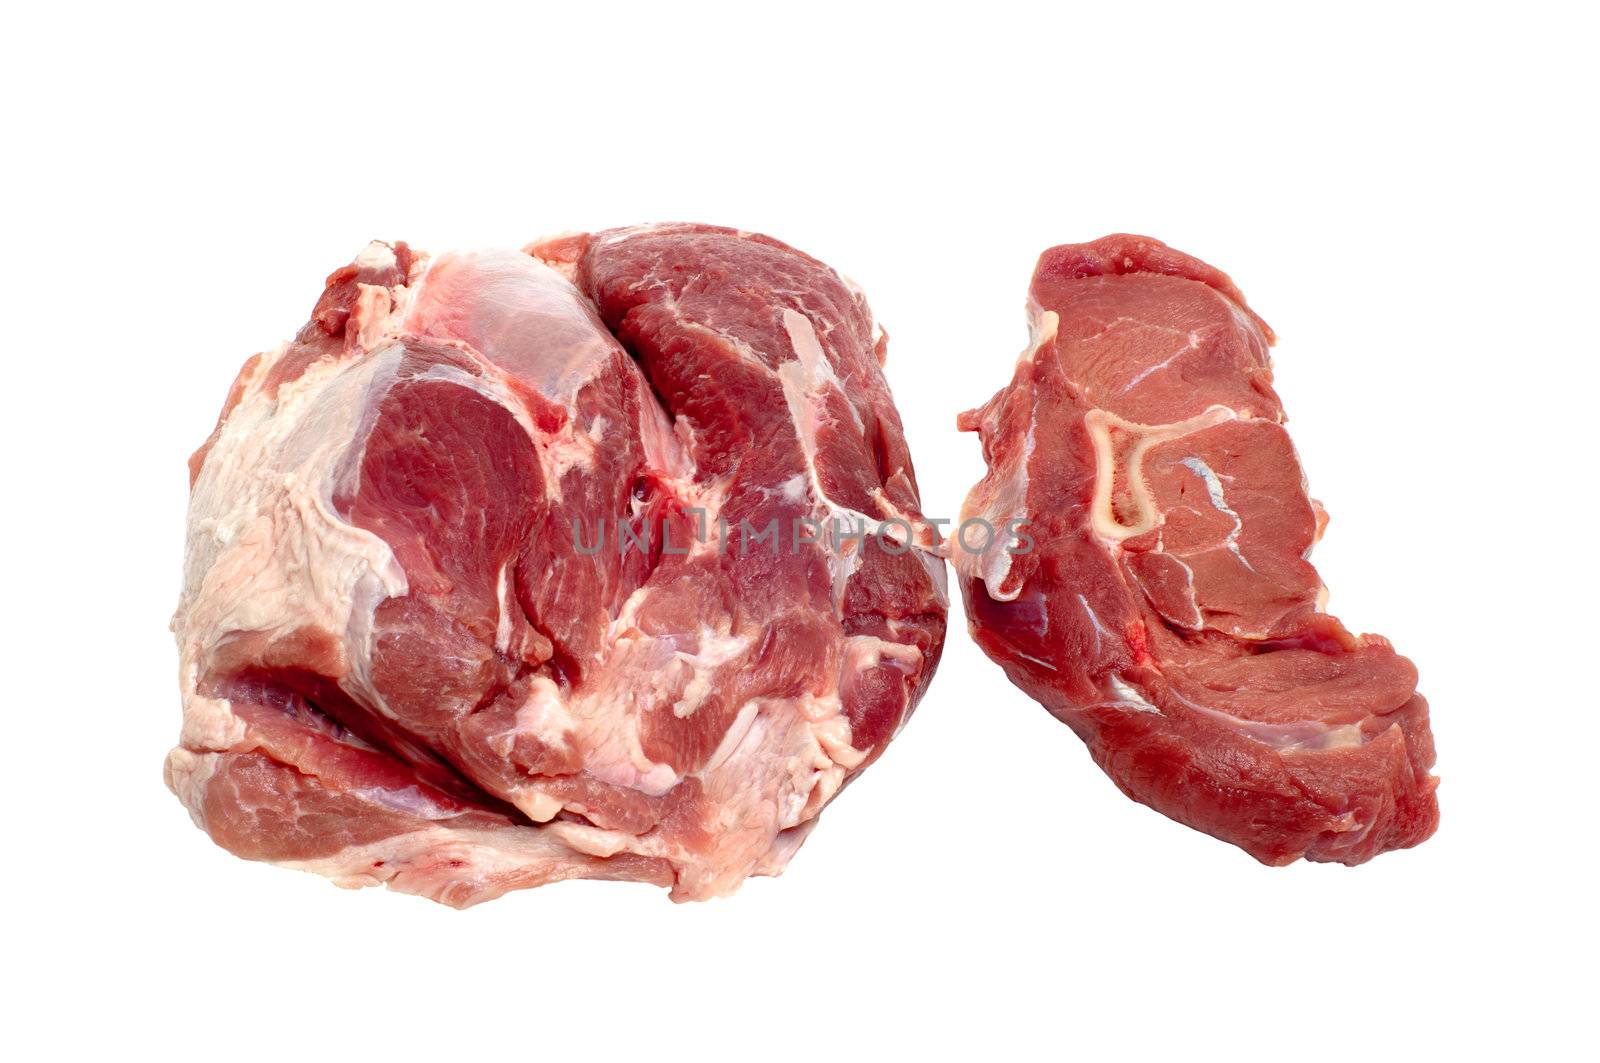 Pork and beef pieces it is isolated on a white background.